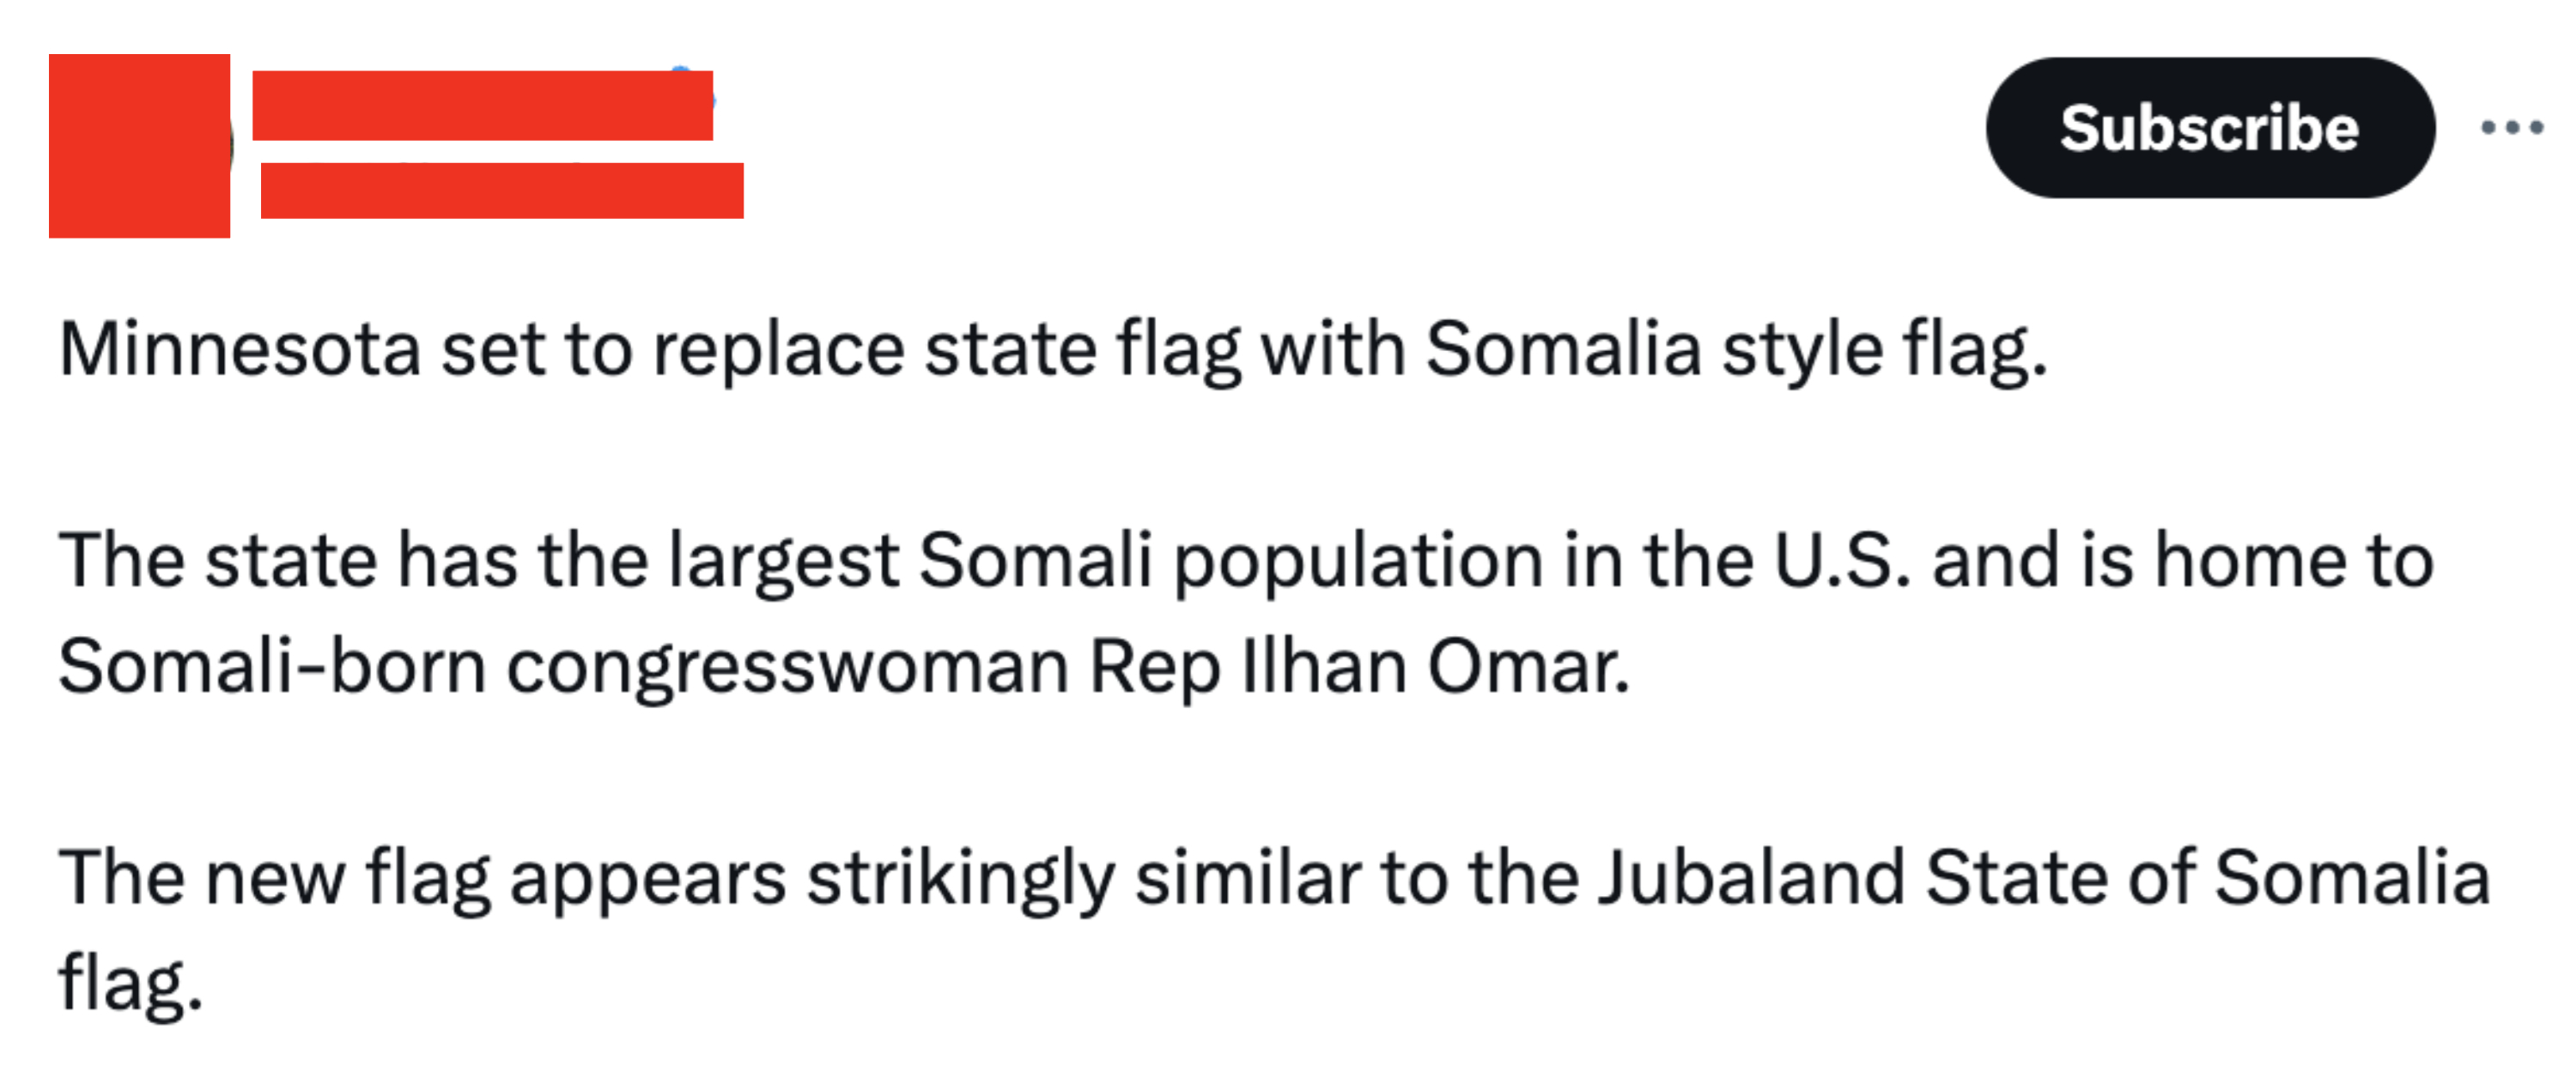 post says minnesota set the to replace state flag with somalia style flag